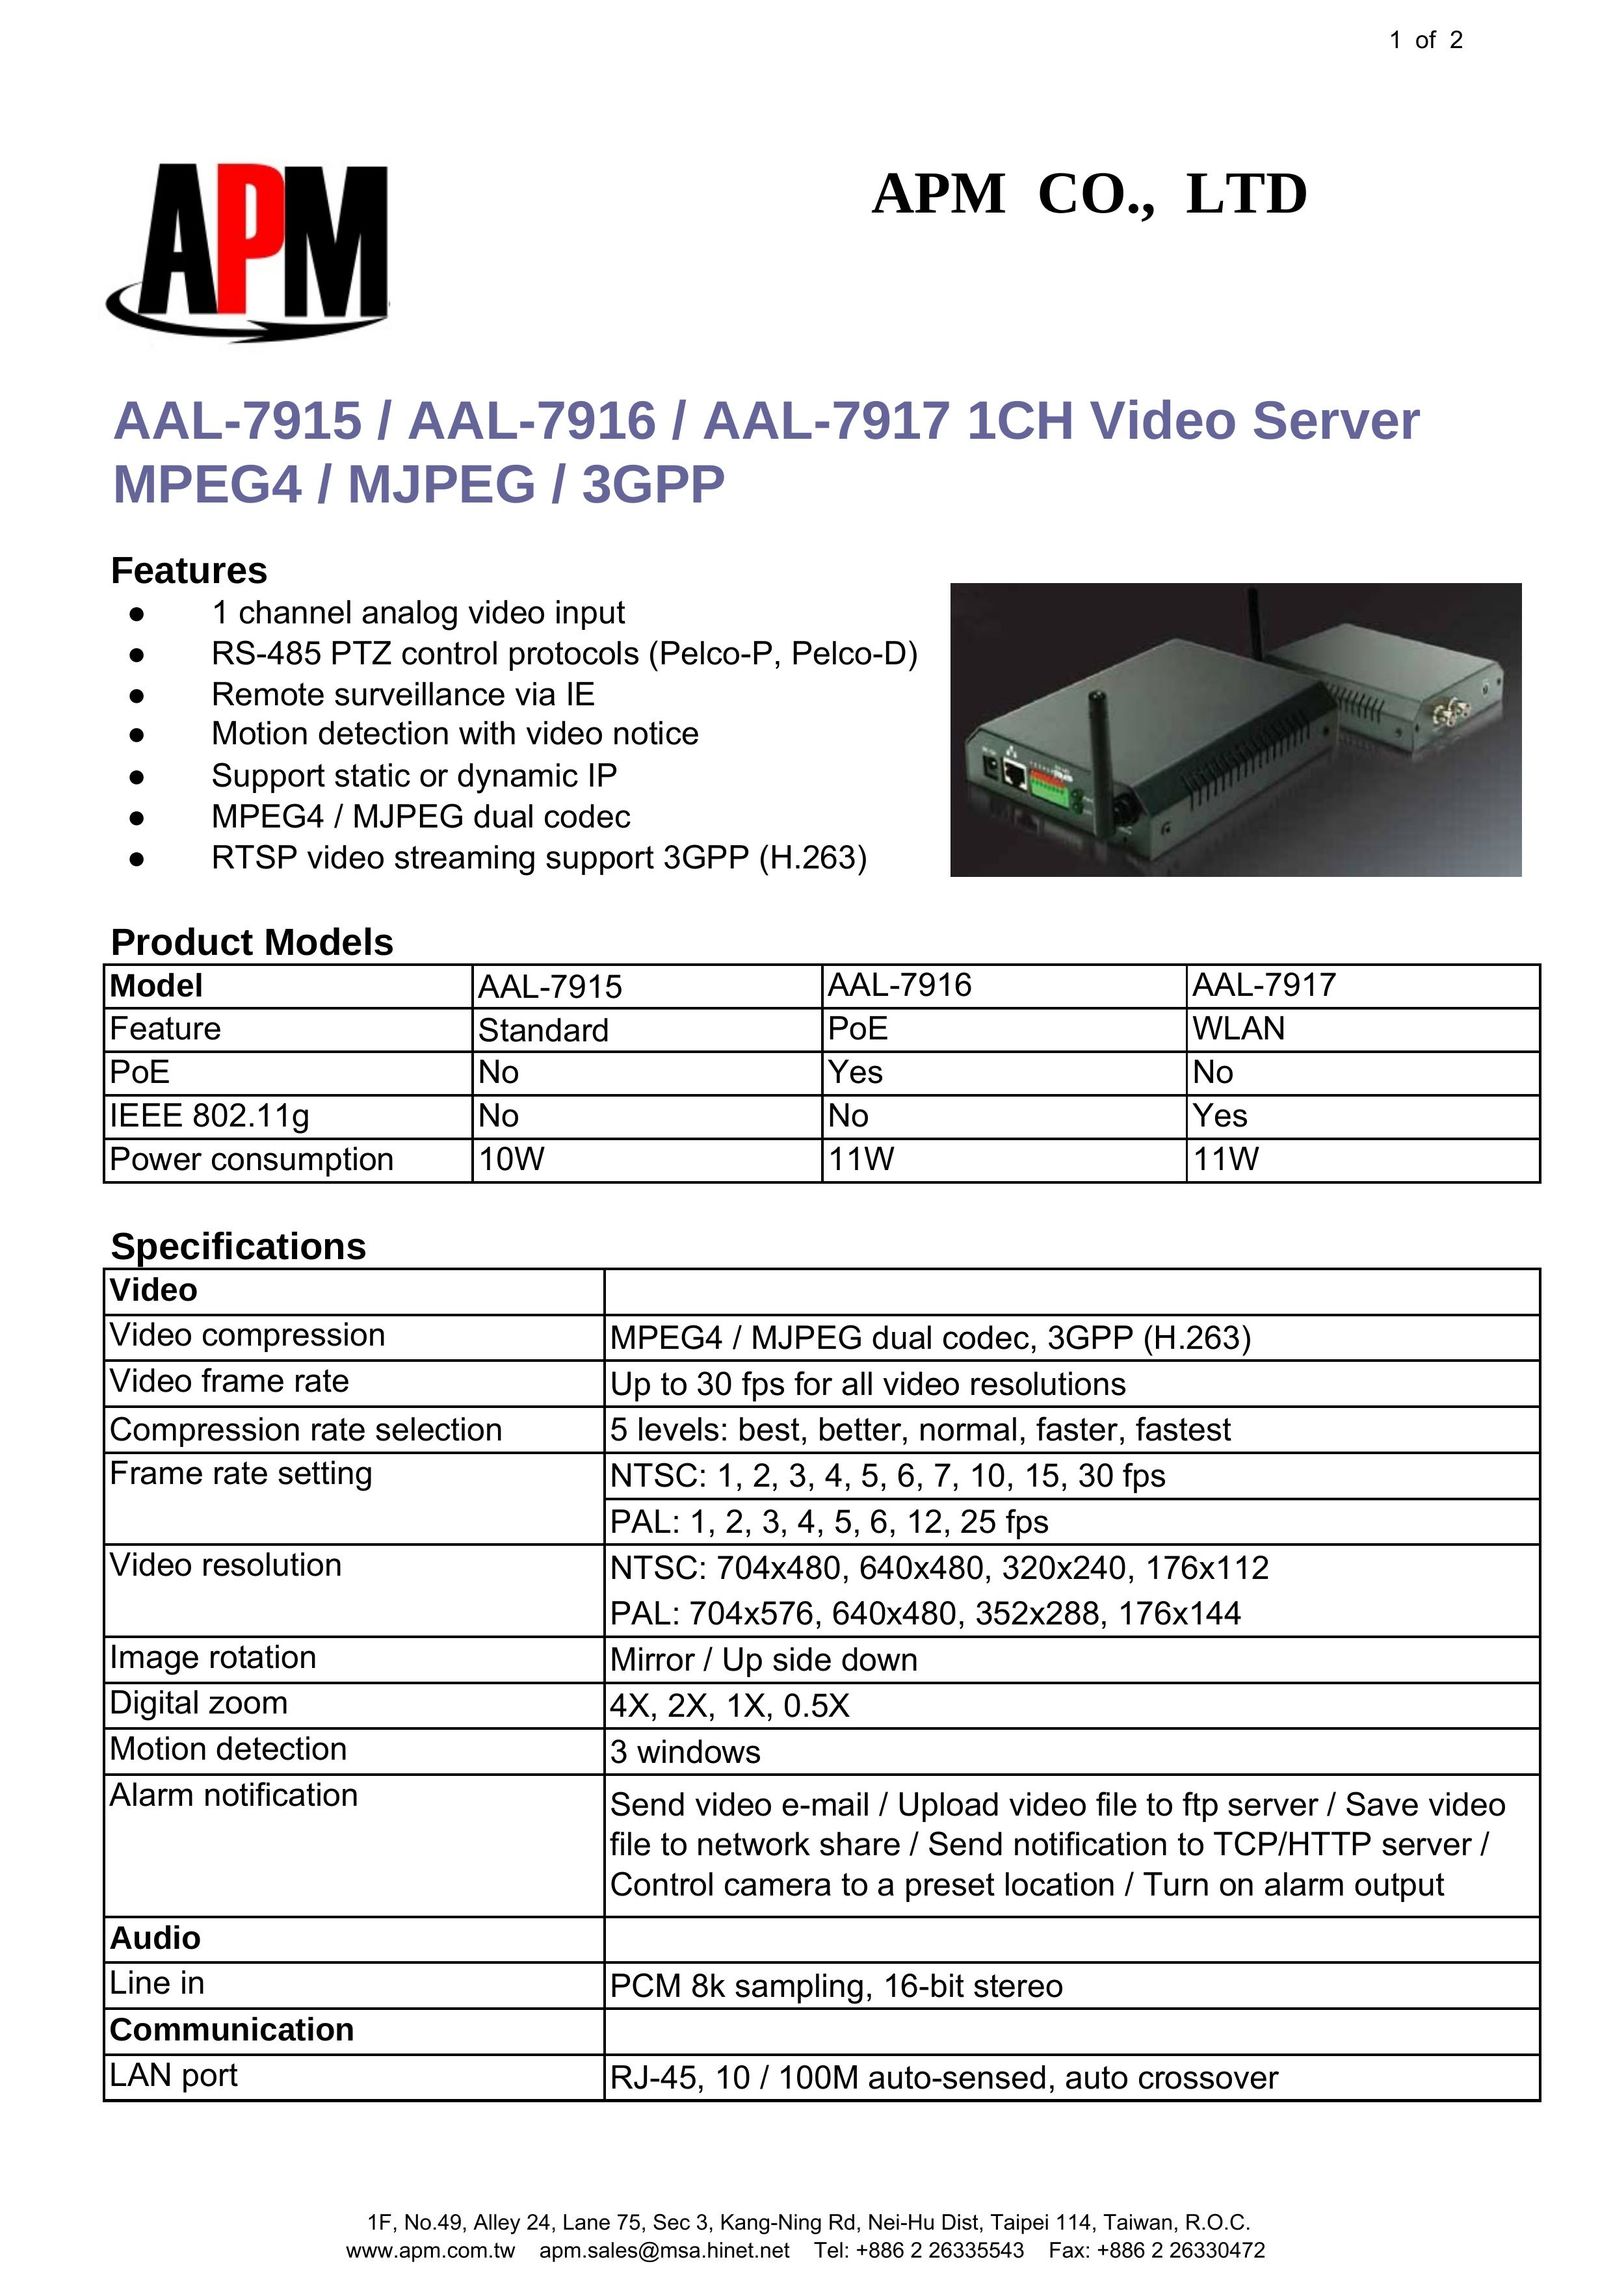 APM AAL-7915 Home Theater Server User Manual